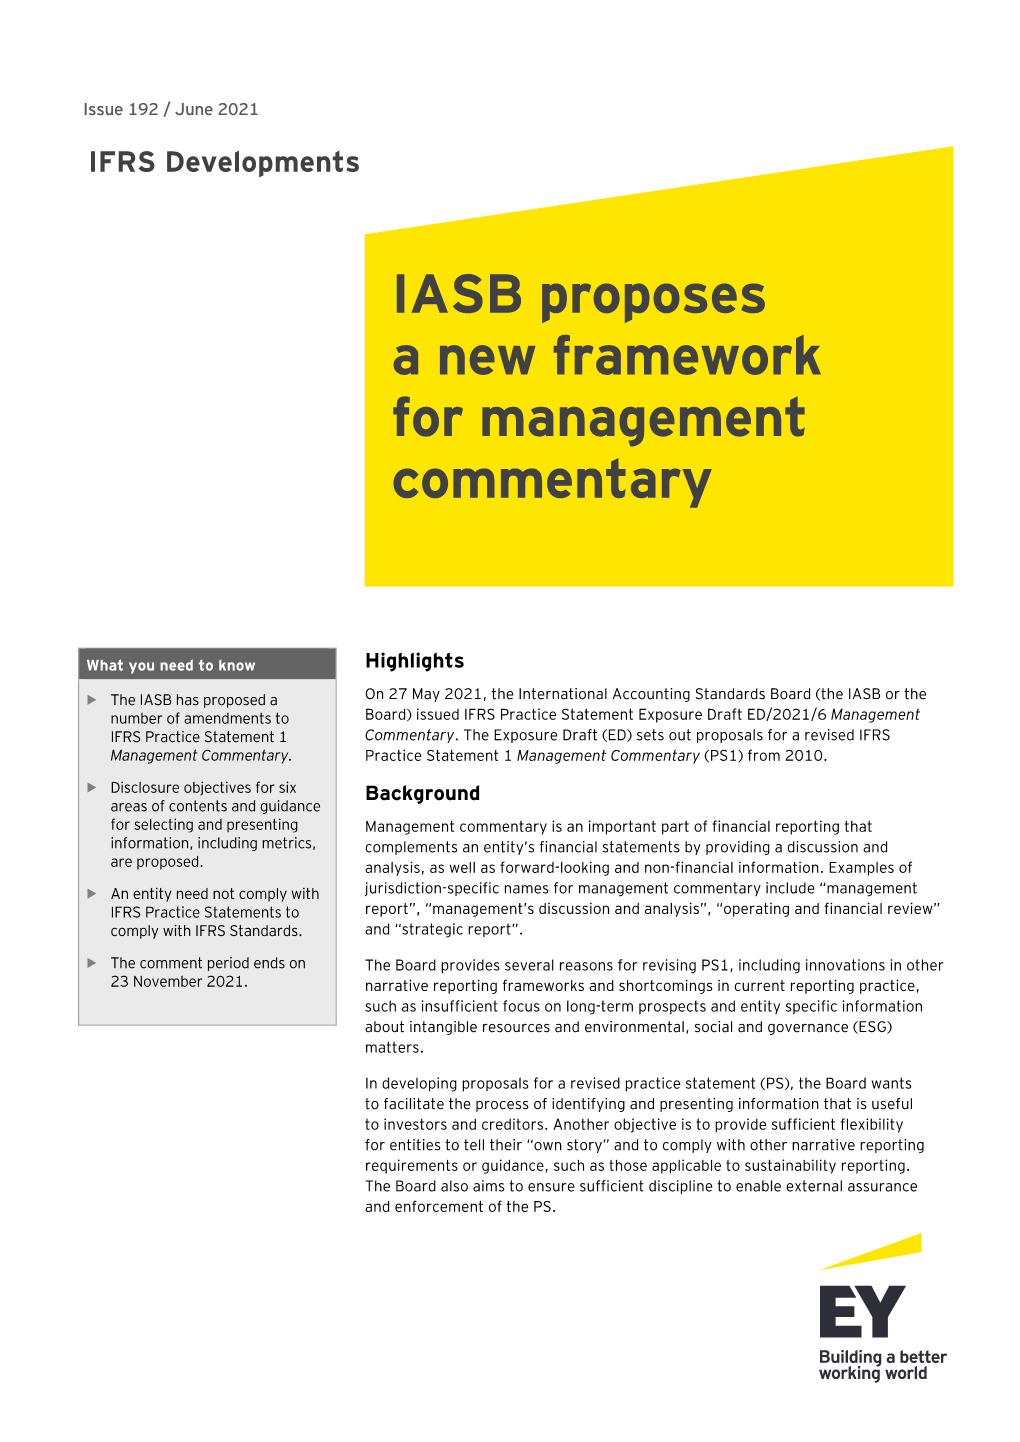 IASB Proposes a New Framework for Management Commentary